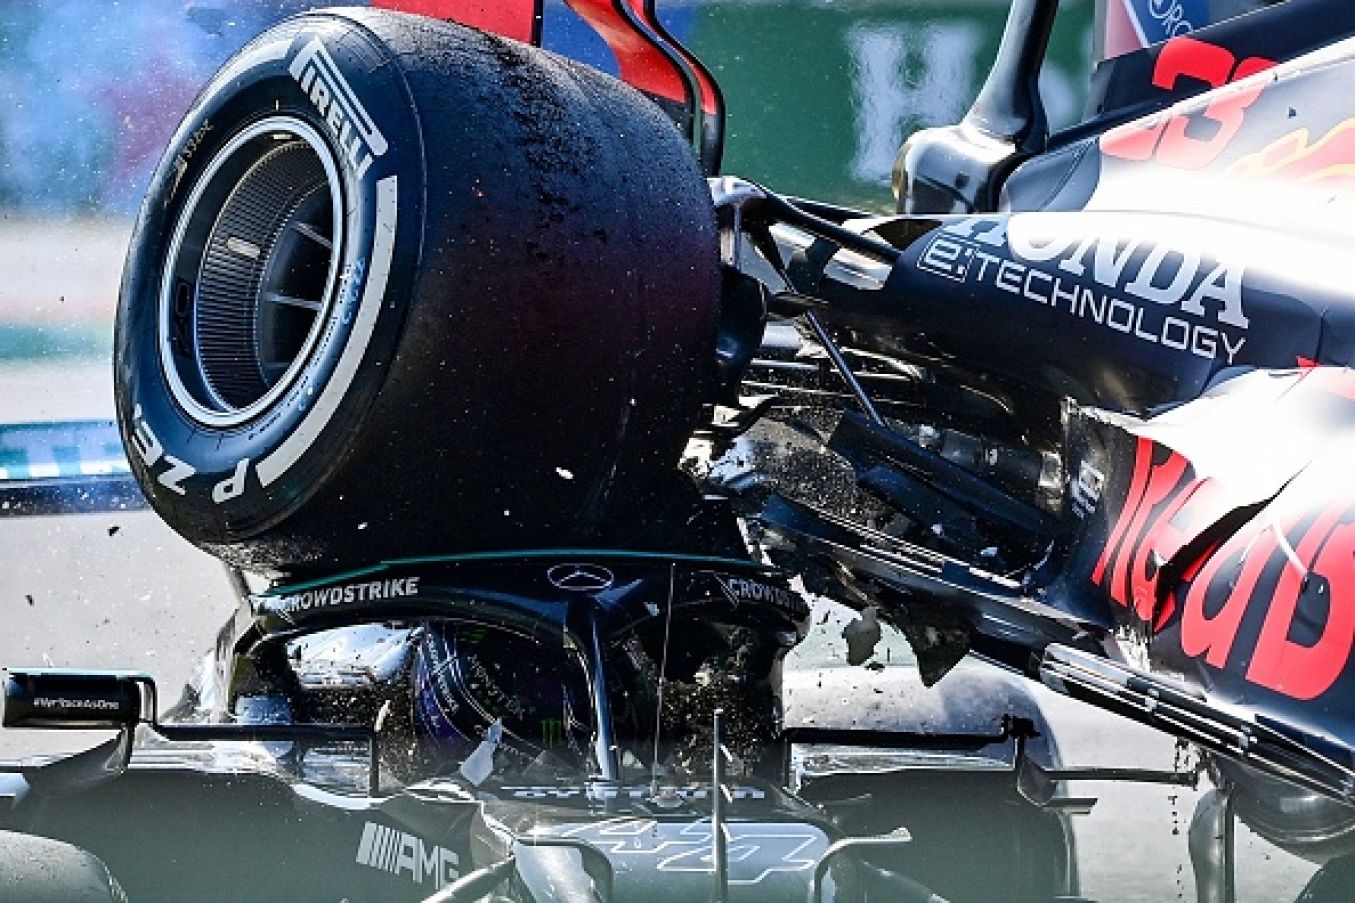 Mercedes' British Driver Lewis Hamilton (L) And Red Bull's Dutch Driver Max Verstappen Collide During The Italian Grand Prix . Photo: Andrej Isakovic/Afp Via Getty Images